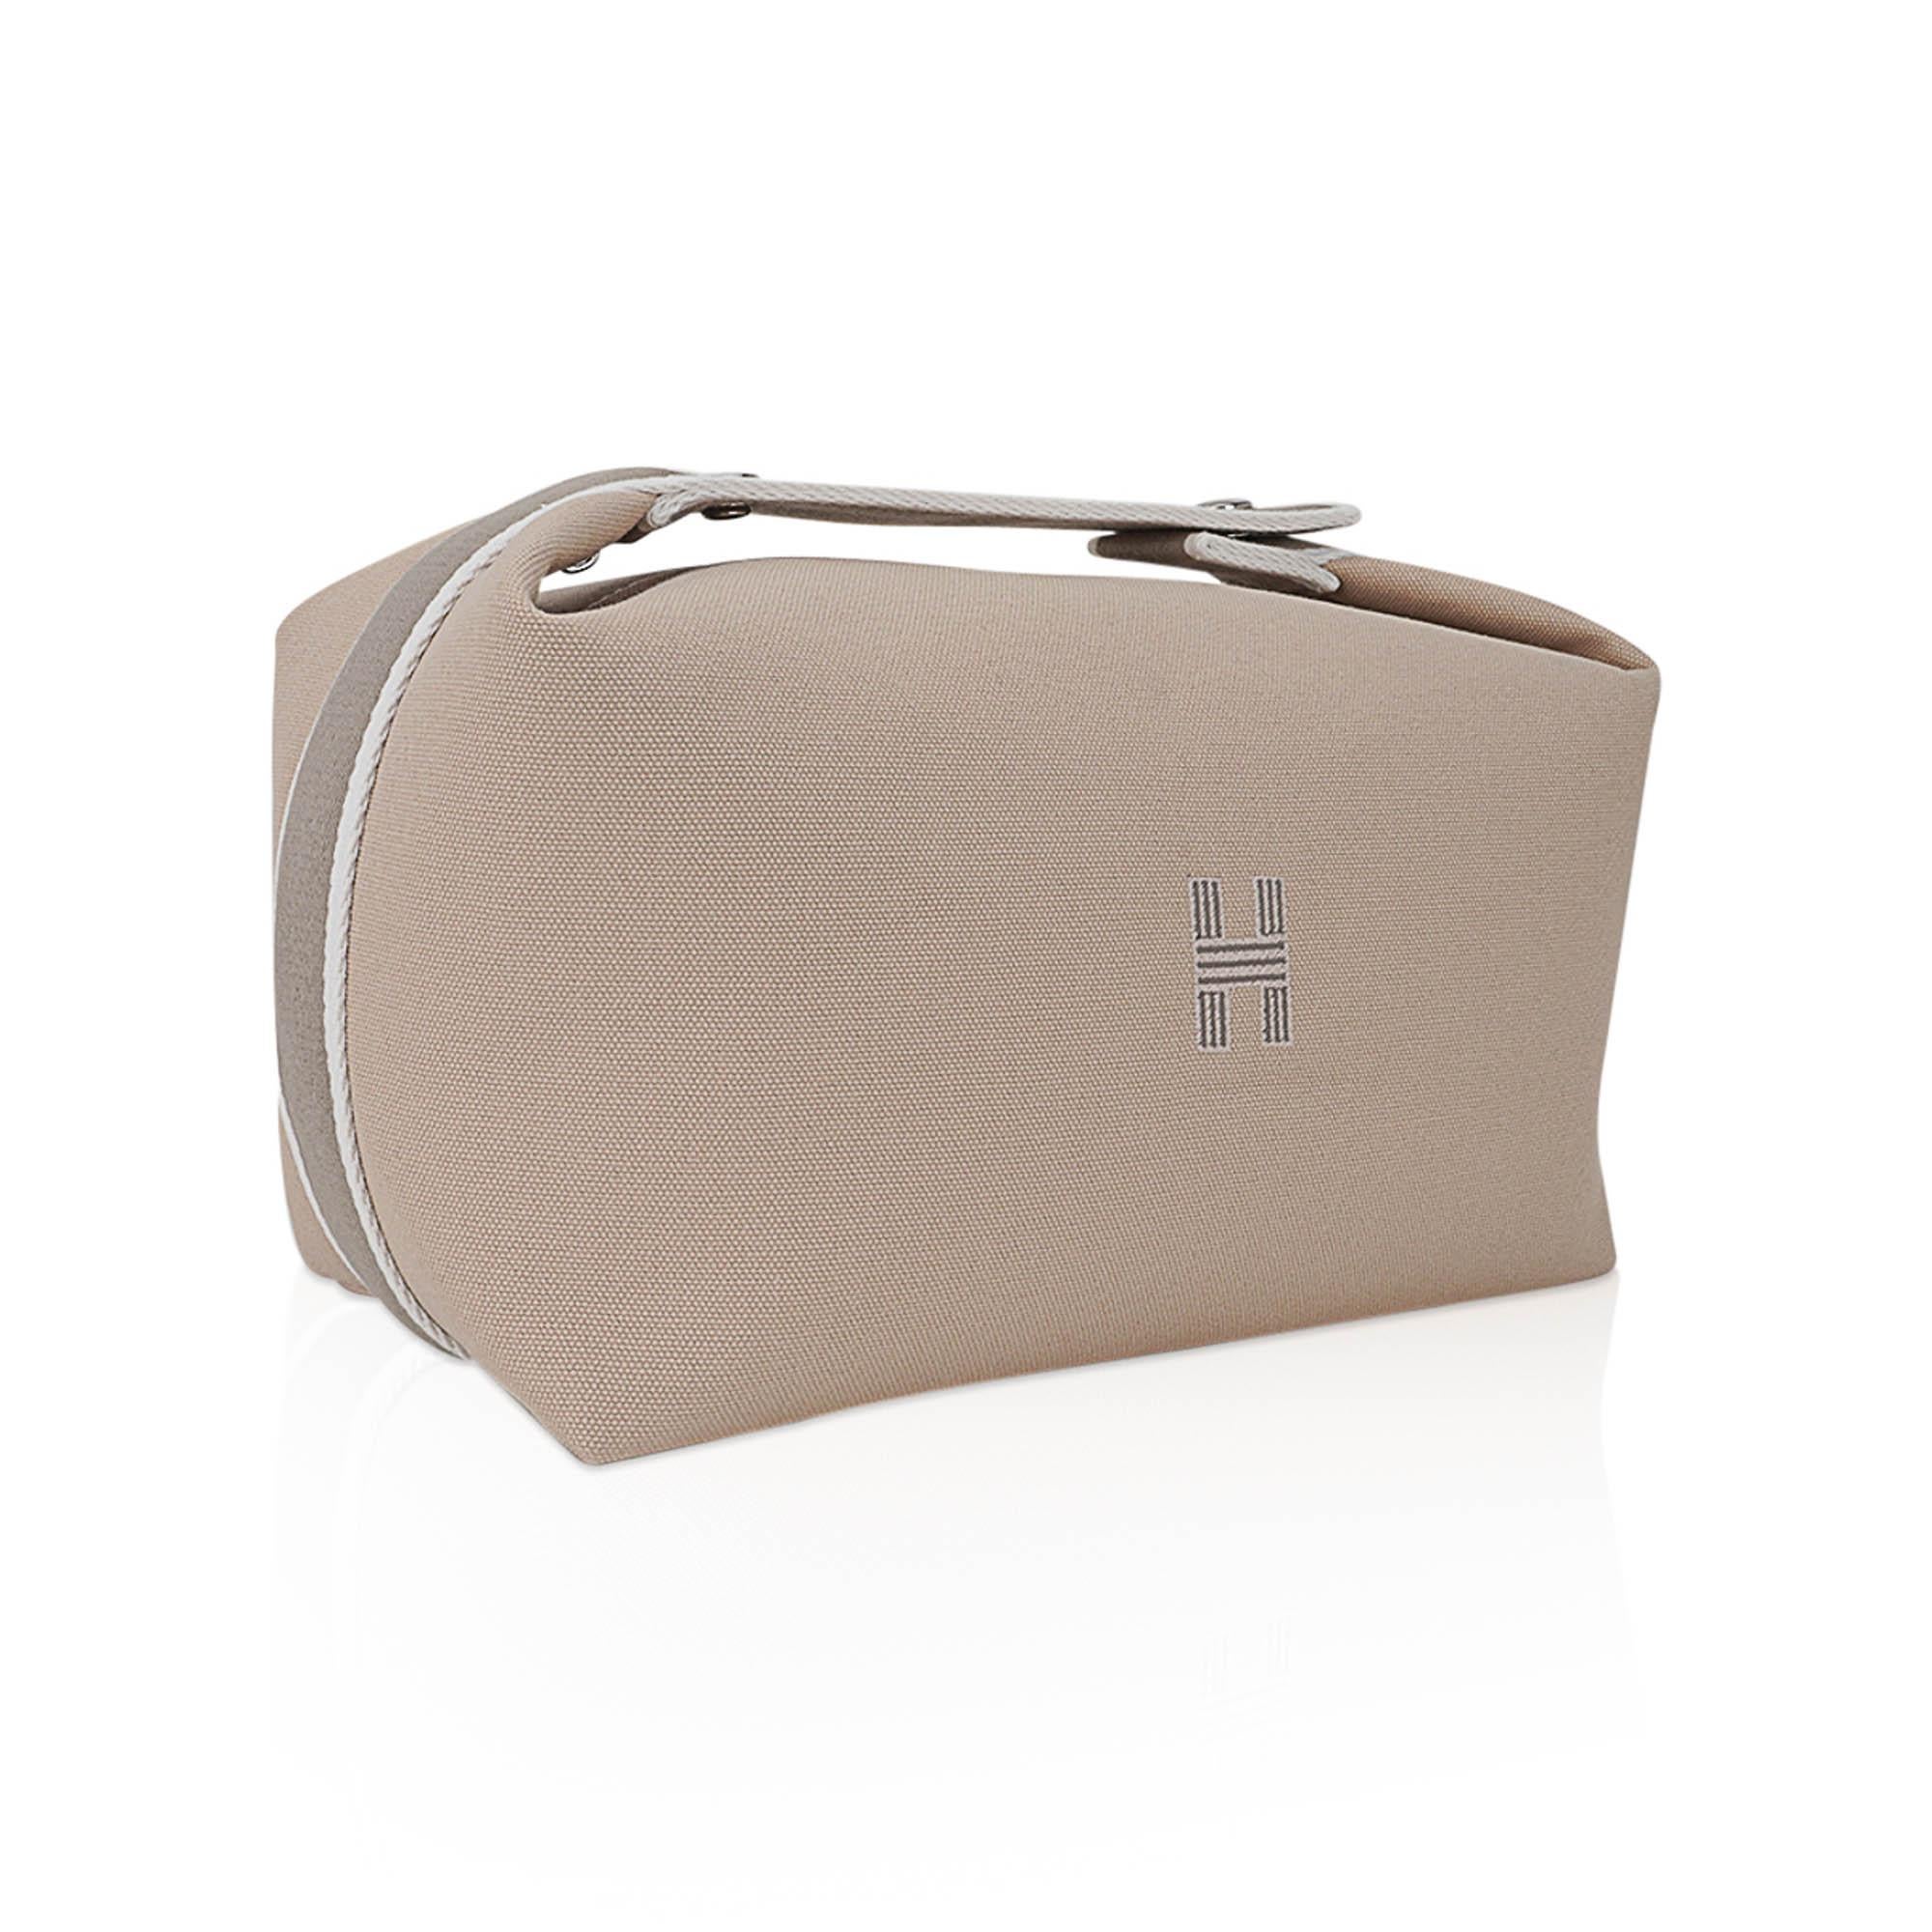 Mightychic offers an  Hermes Trousse Bride-A-Brac cosmetic bag featured in Naturel canvas.
Embroidered H on the front.
Top strap features a woven zig zag with White trim.
With two Clou de Selle snaps, the strap opens over a top zip with leather